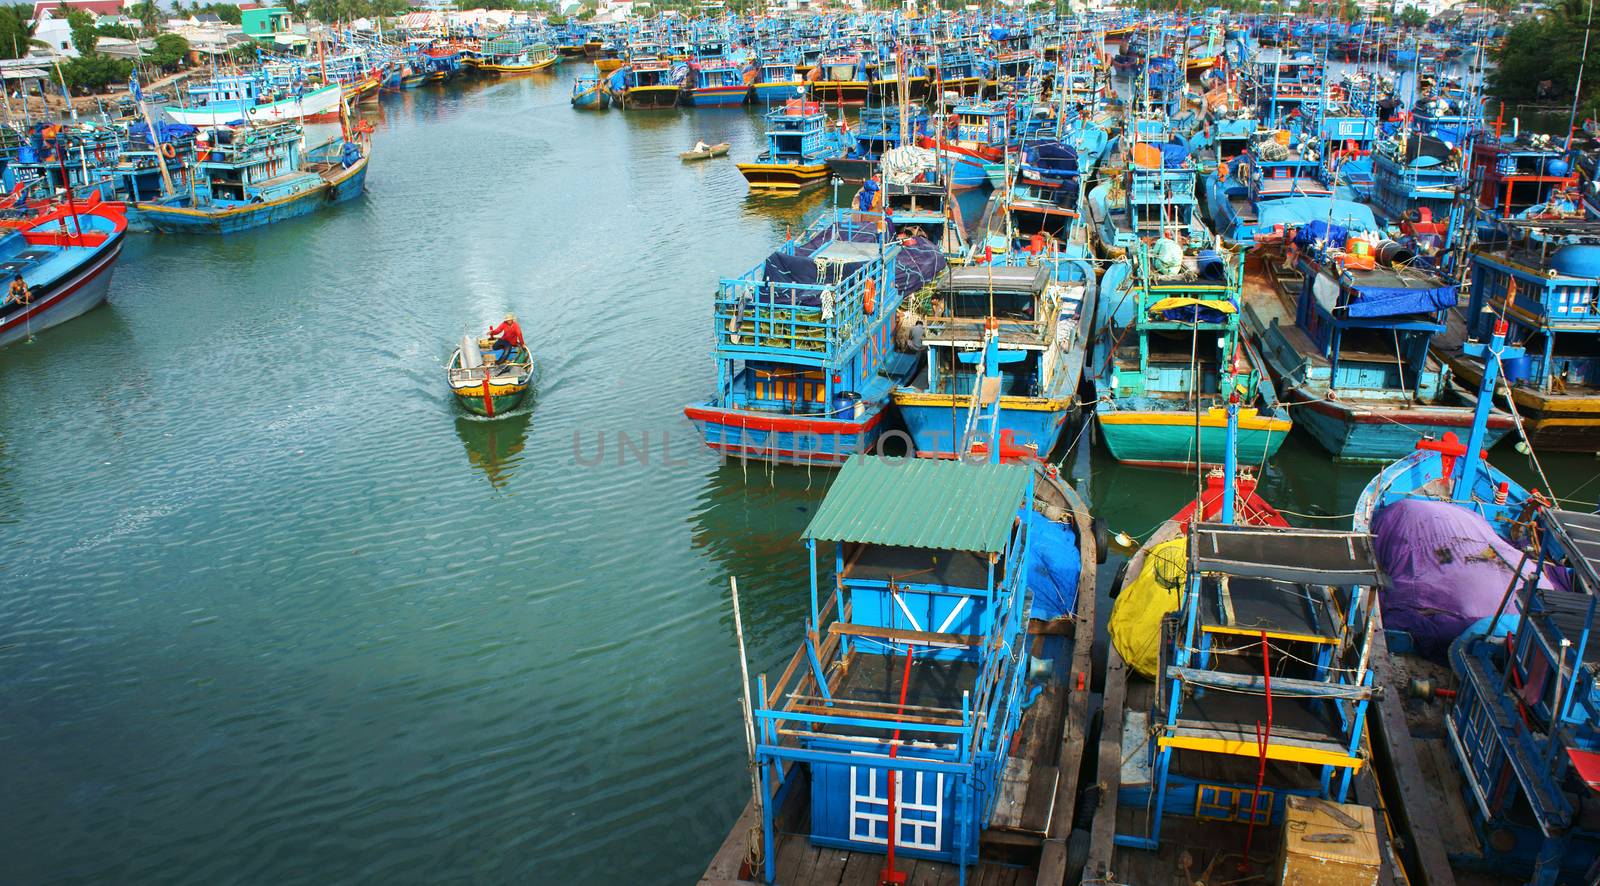 Many multicolor fishing boat anchor like a net at fishing port, with blue tone in horizontal frame. Frebruary 2, 2013